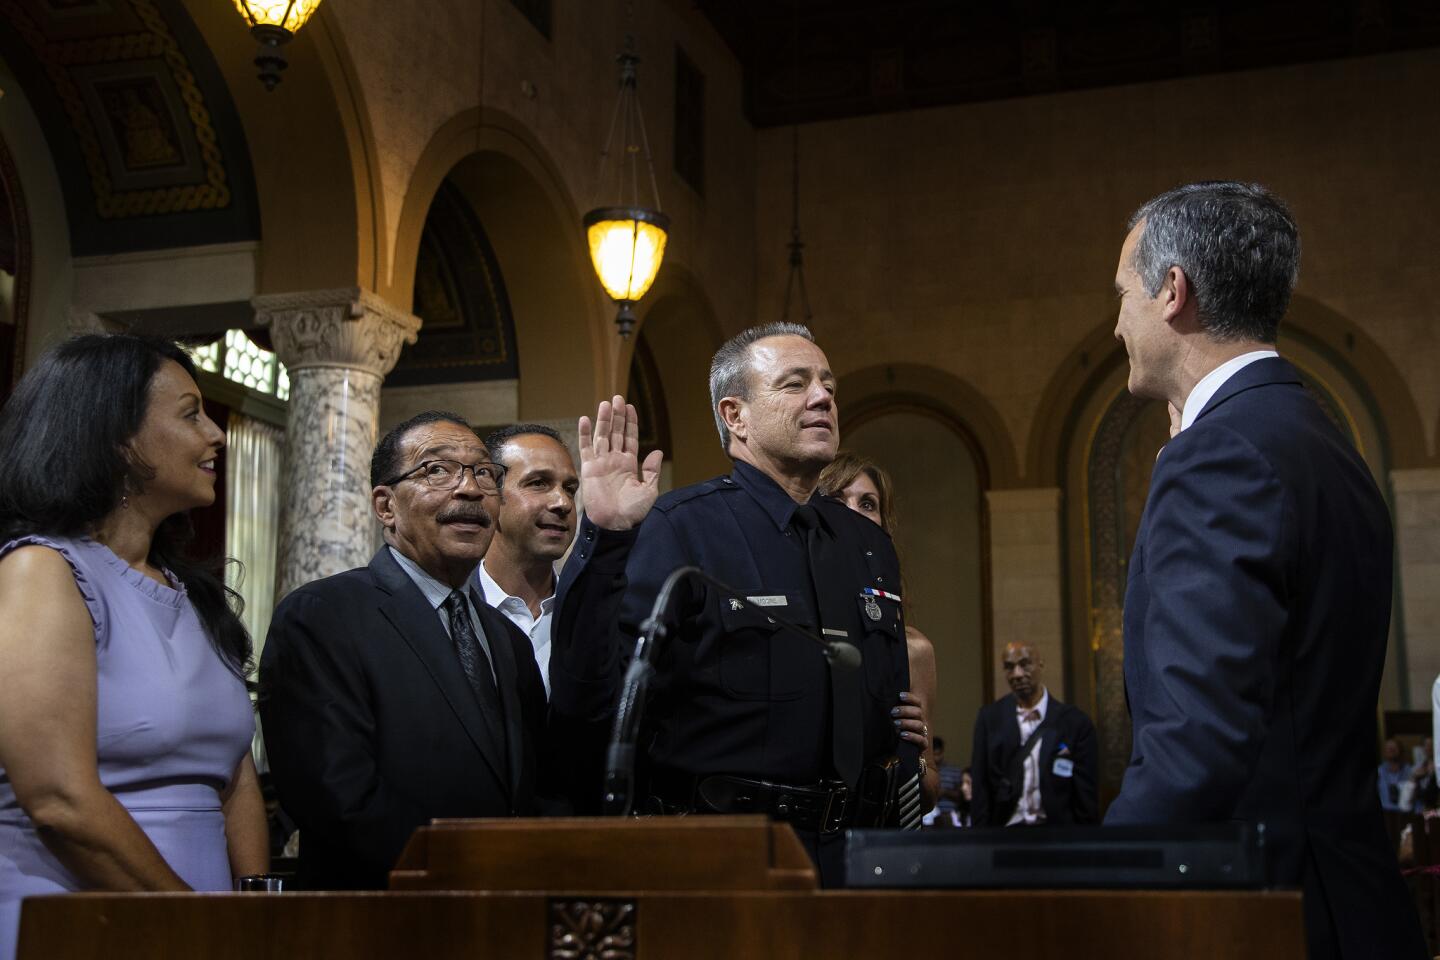 New LAPD Chief Michel Moore